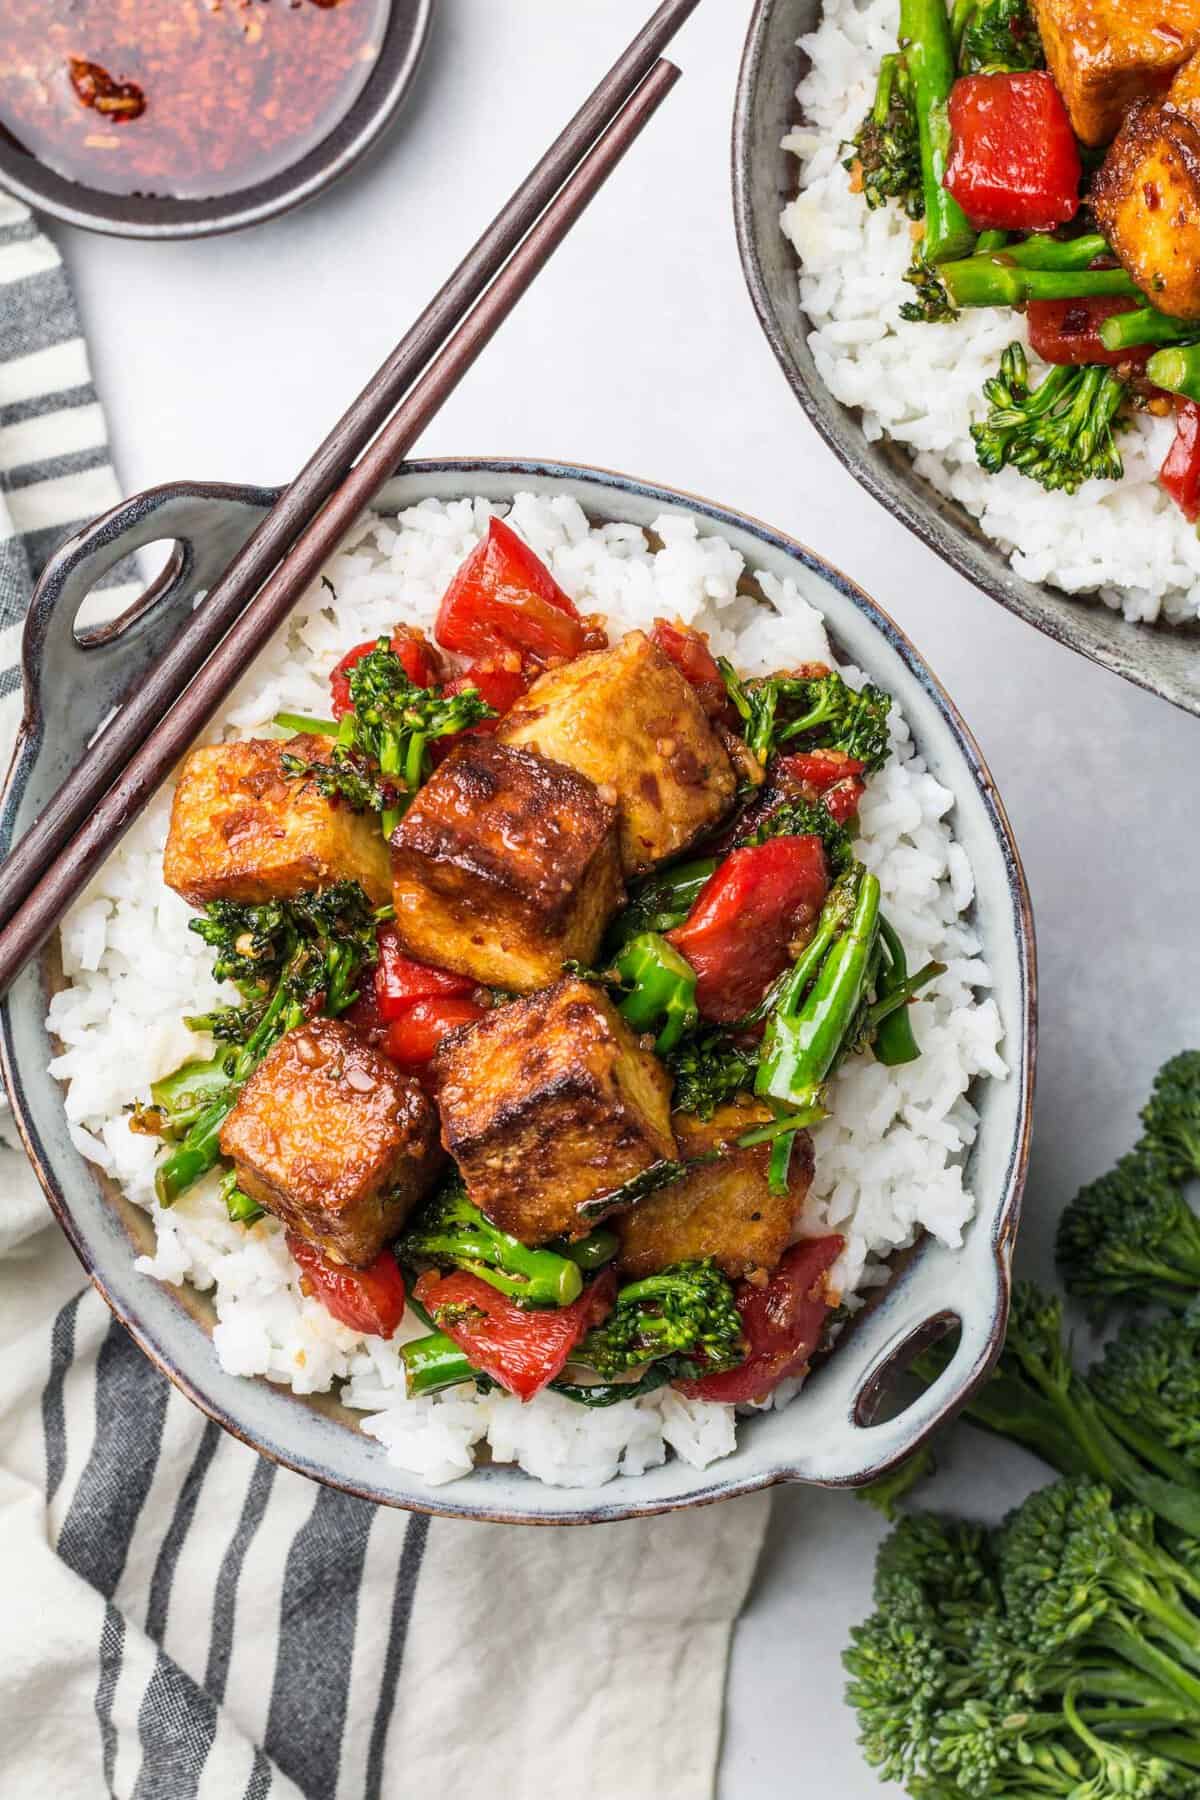 A serving of spicy tofu stir fry sits on a bed of white rice in a small bowl. Chopsticks sit on the side of the bowl.